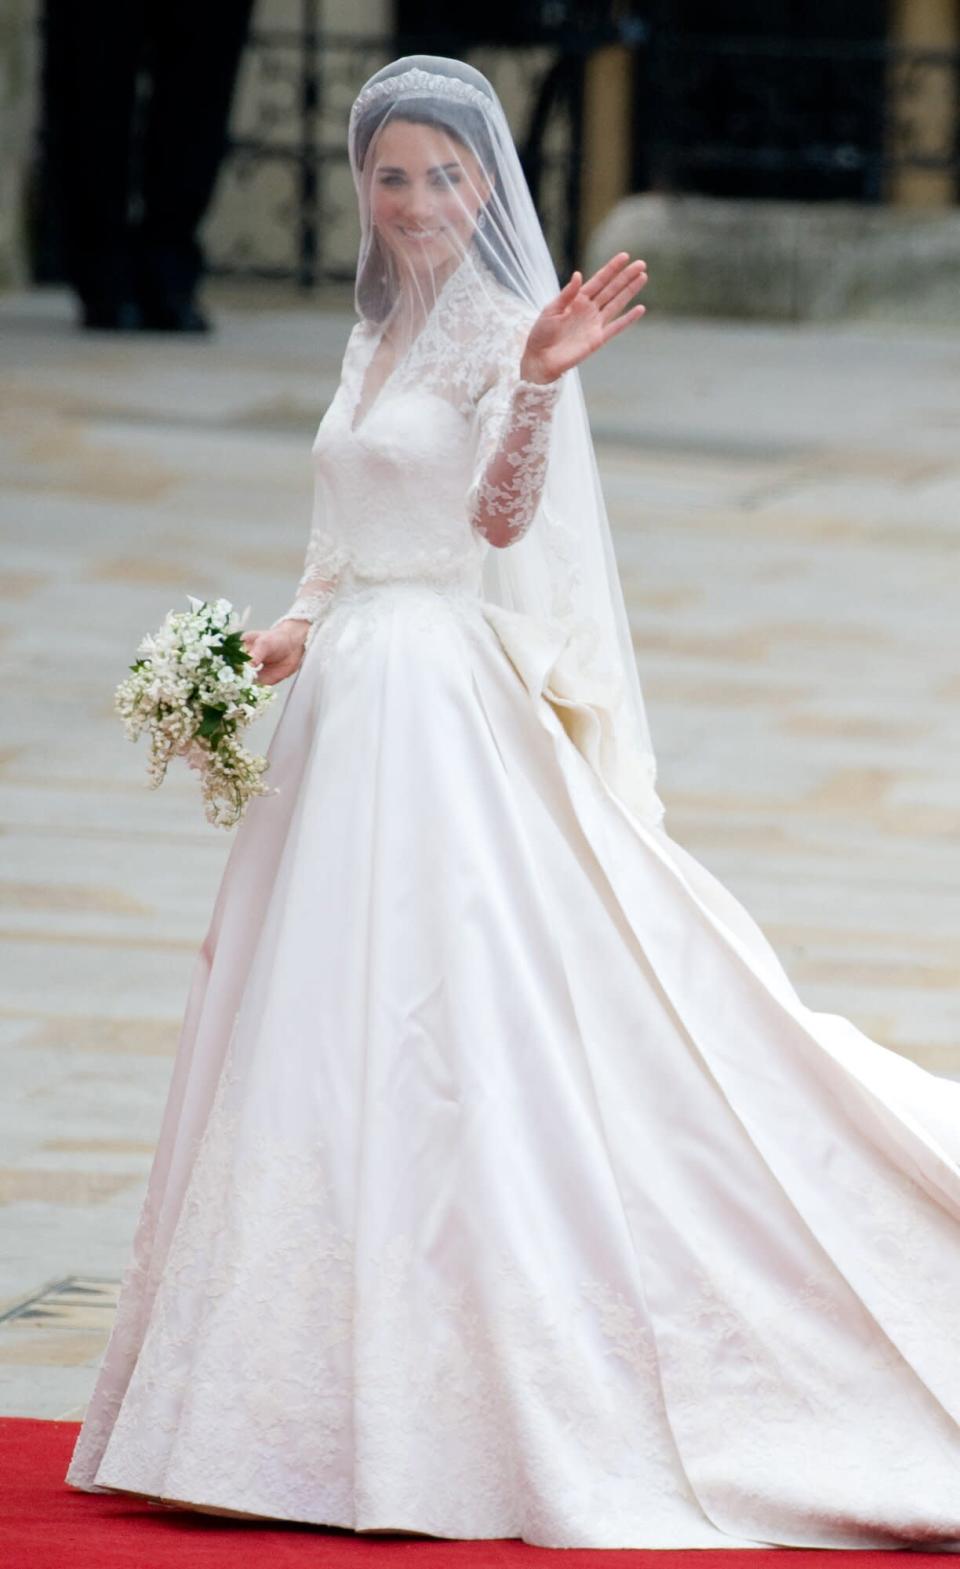 Catherine Middleton arrives to attend her Royal Wedding to Prince William at Westminster Abbey on April 29, 2011 in London, England.